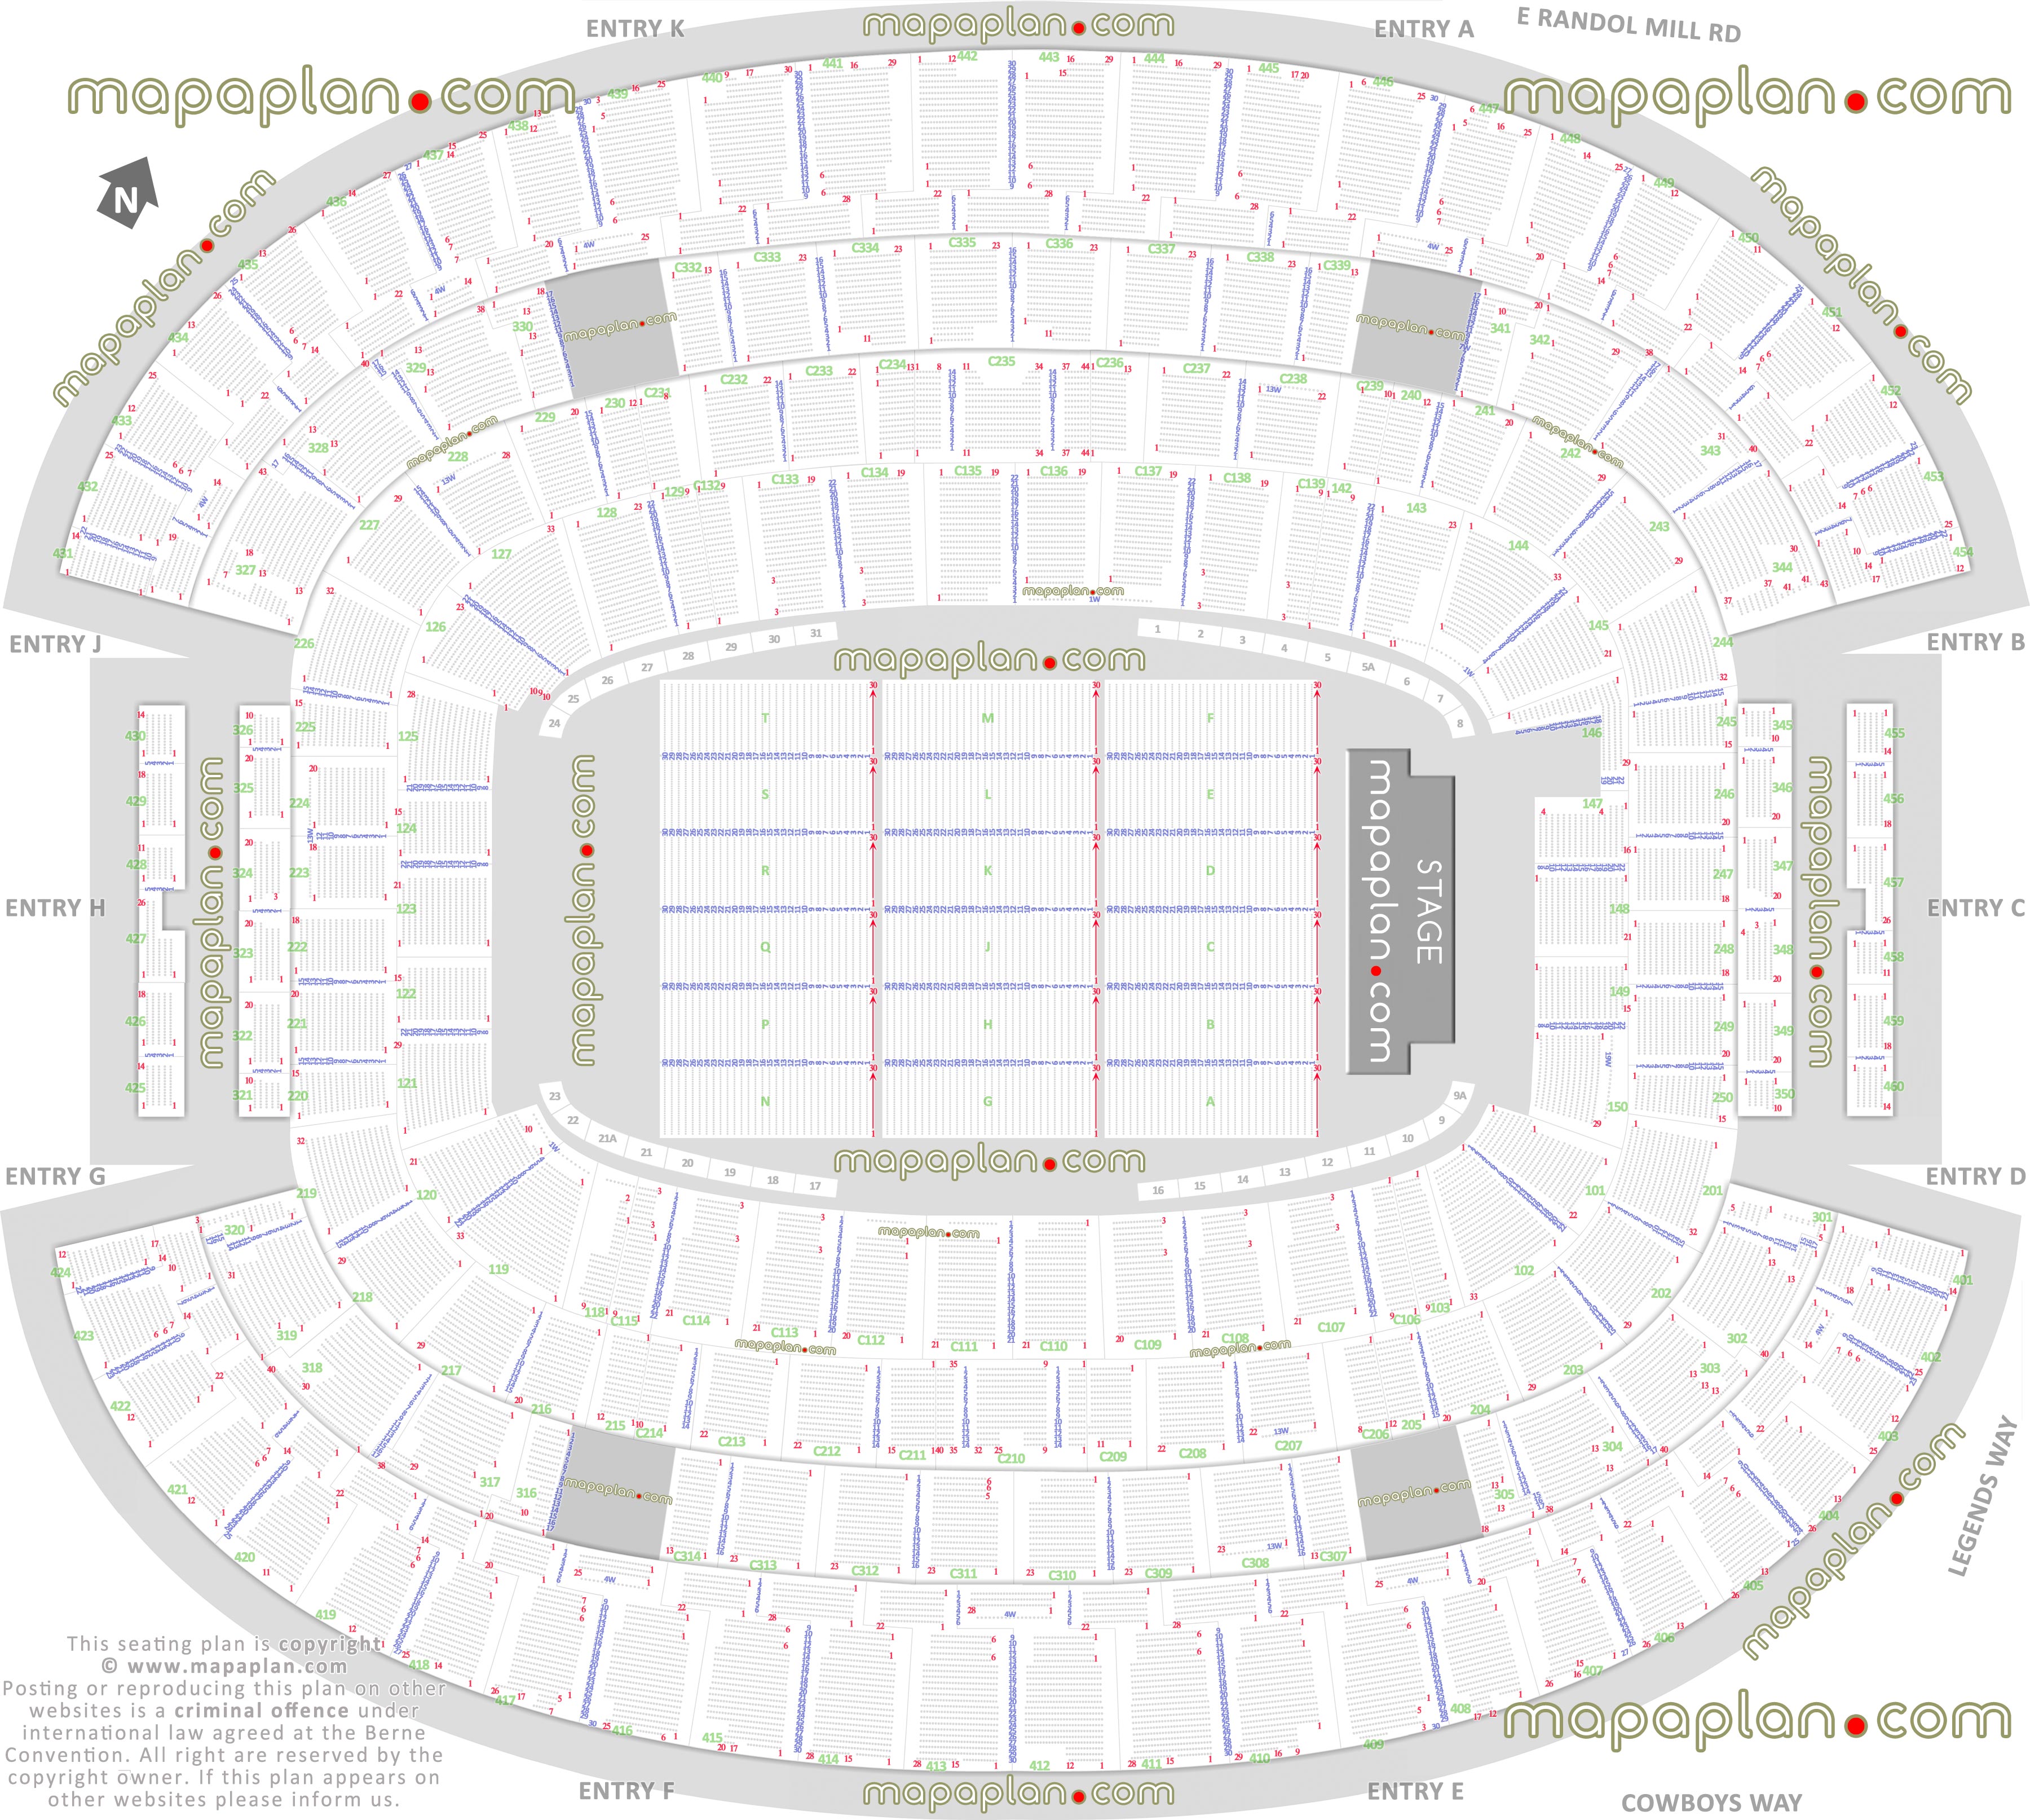 detailed seat row numbers end stage concert sections floor plan map virtual 3d interactive layout Dallas Cowboys AT&T Stadium seating chart